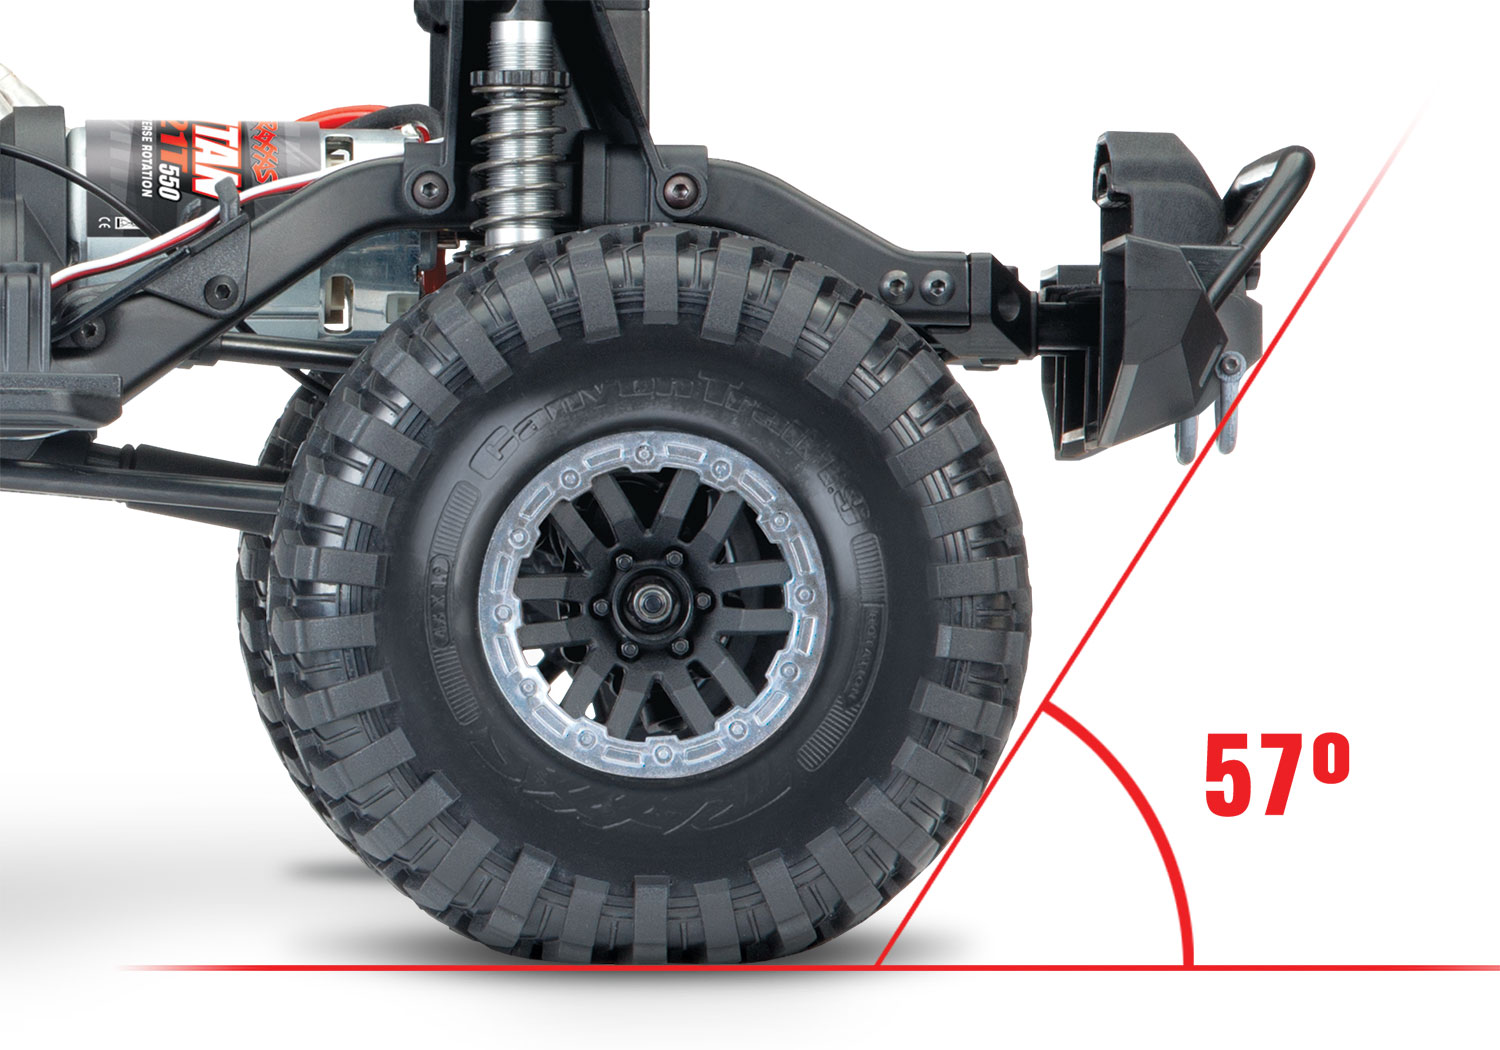 PACK ECO 100% RTR TRX-4 LAND ROVER DEFENDER SABLE LIPO 3S 4000 MAH CHARGEUR TRAXXAS SAC OFFERT